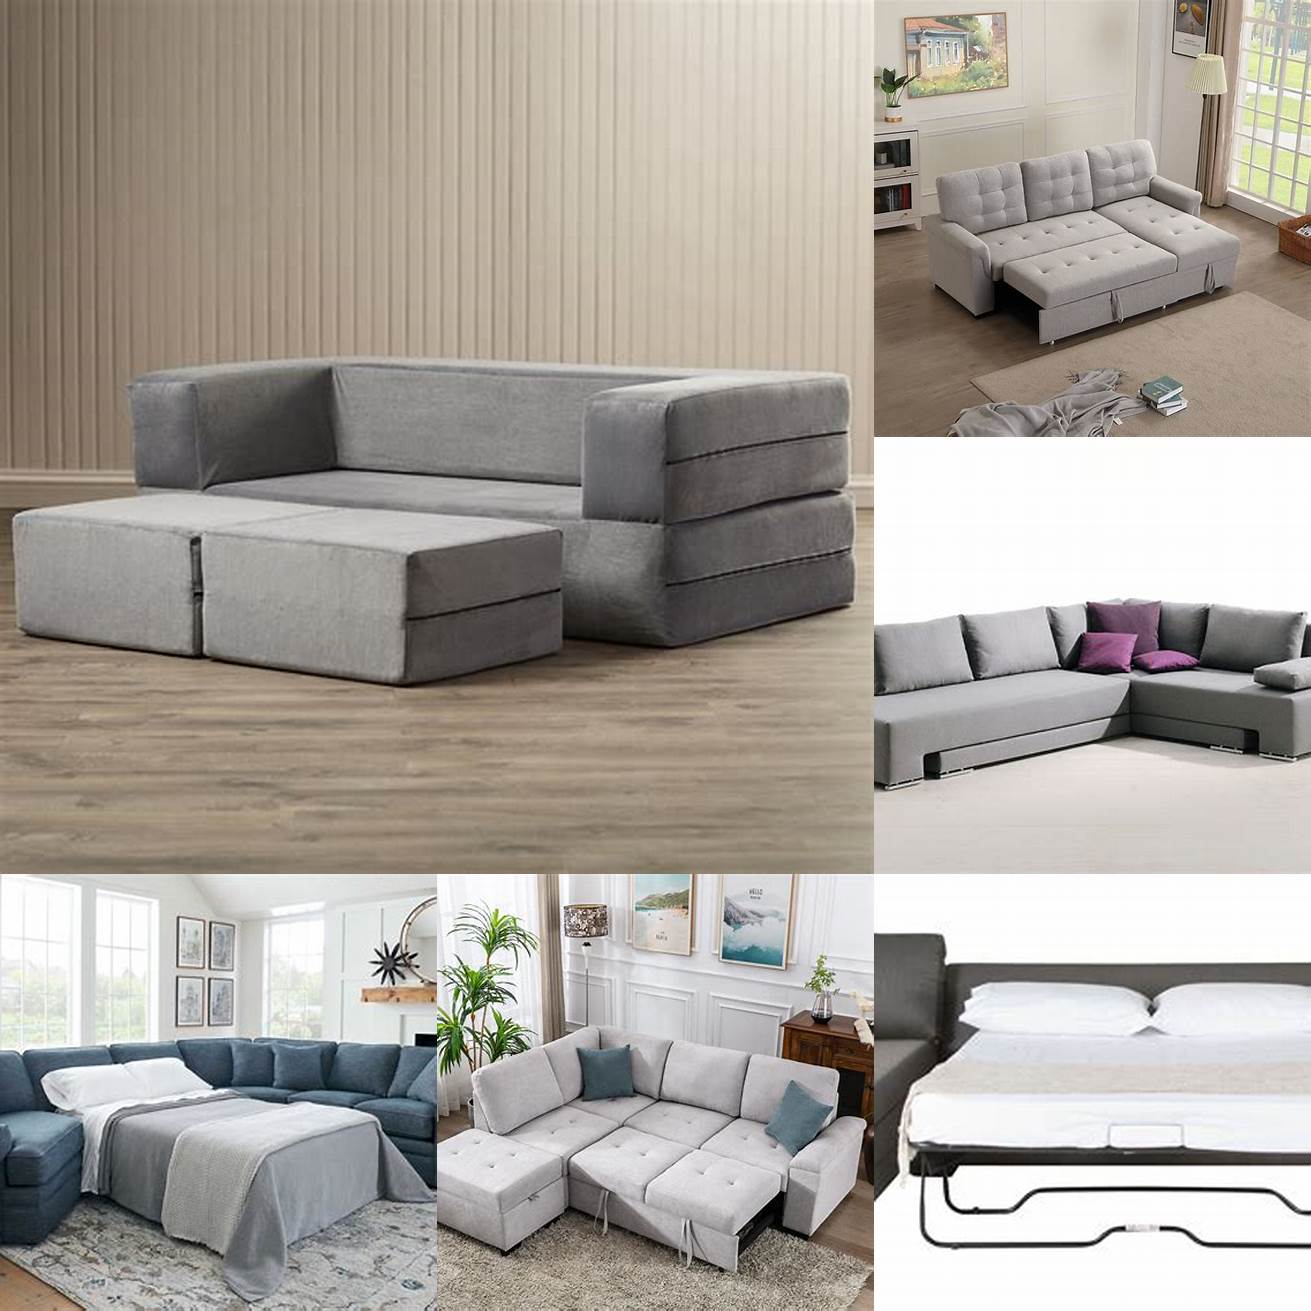 A modular Full Sleeper Sofa is a great option if you want to customize your seating arrangement